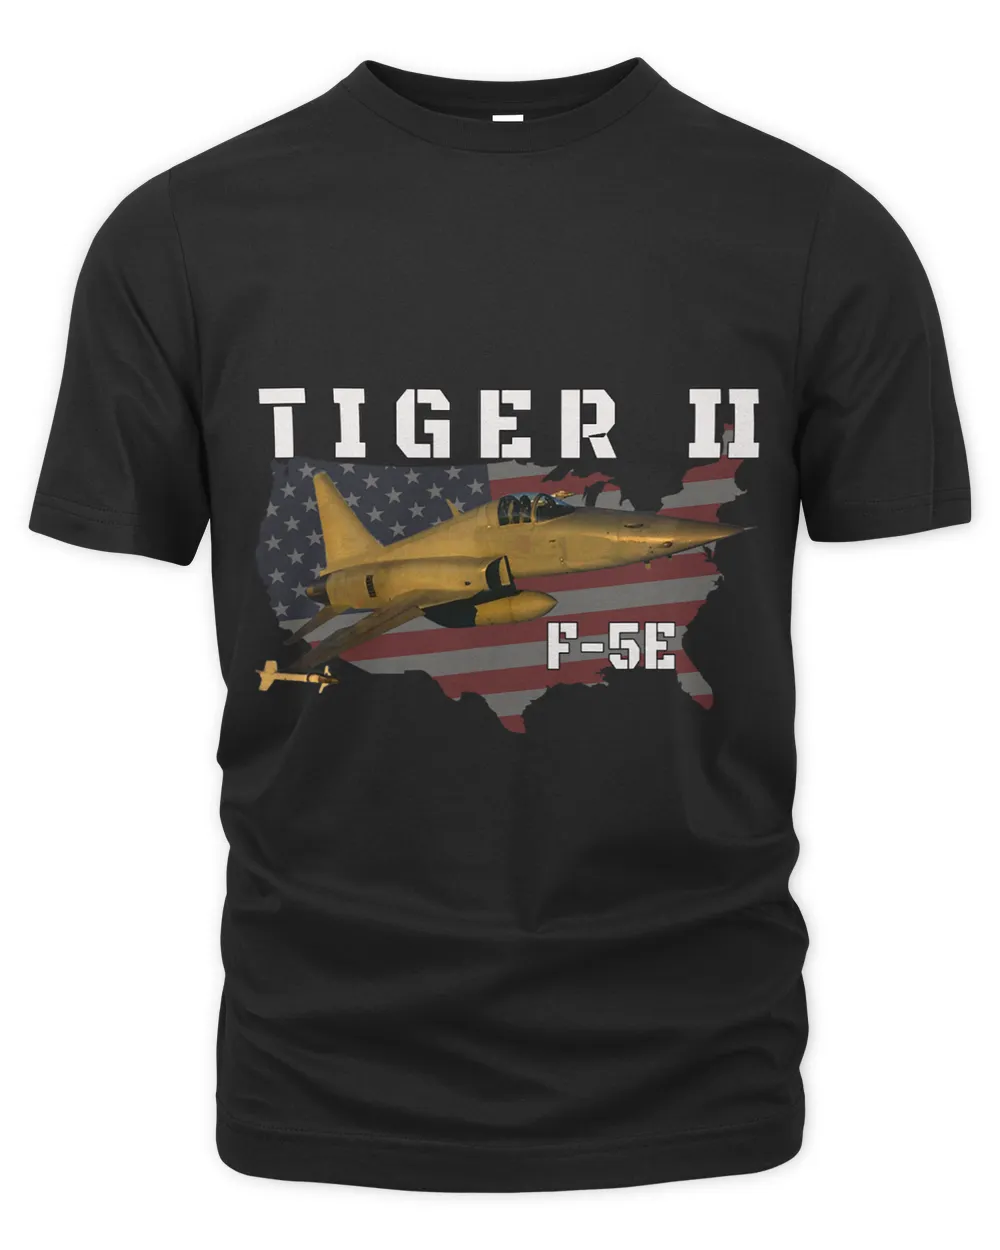 F5E Tiger II Jet Fighter Plane Military Aviation Aircraft